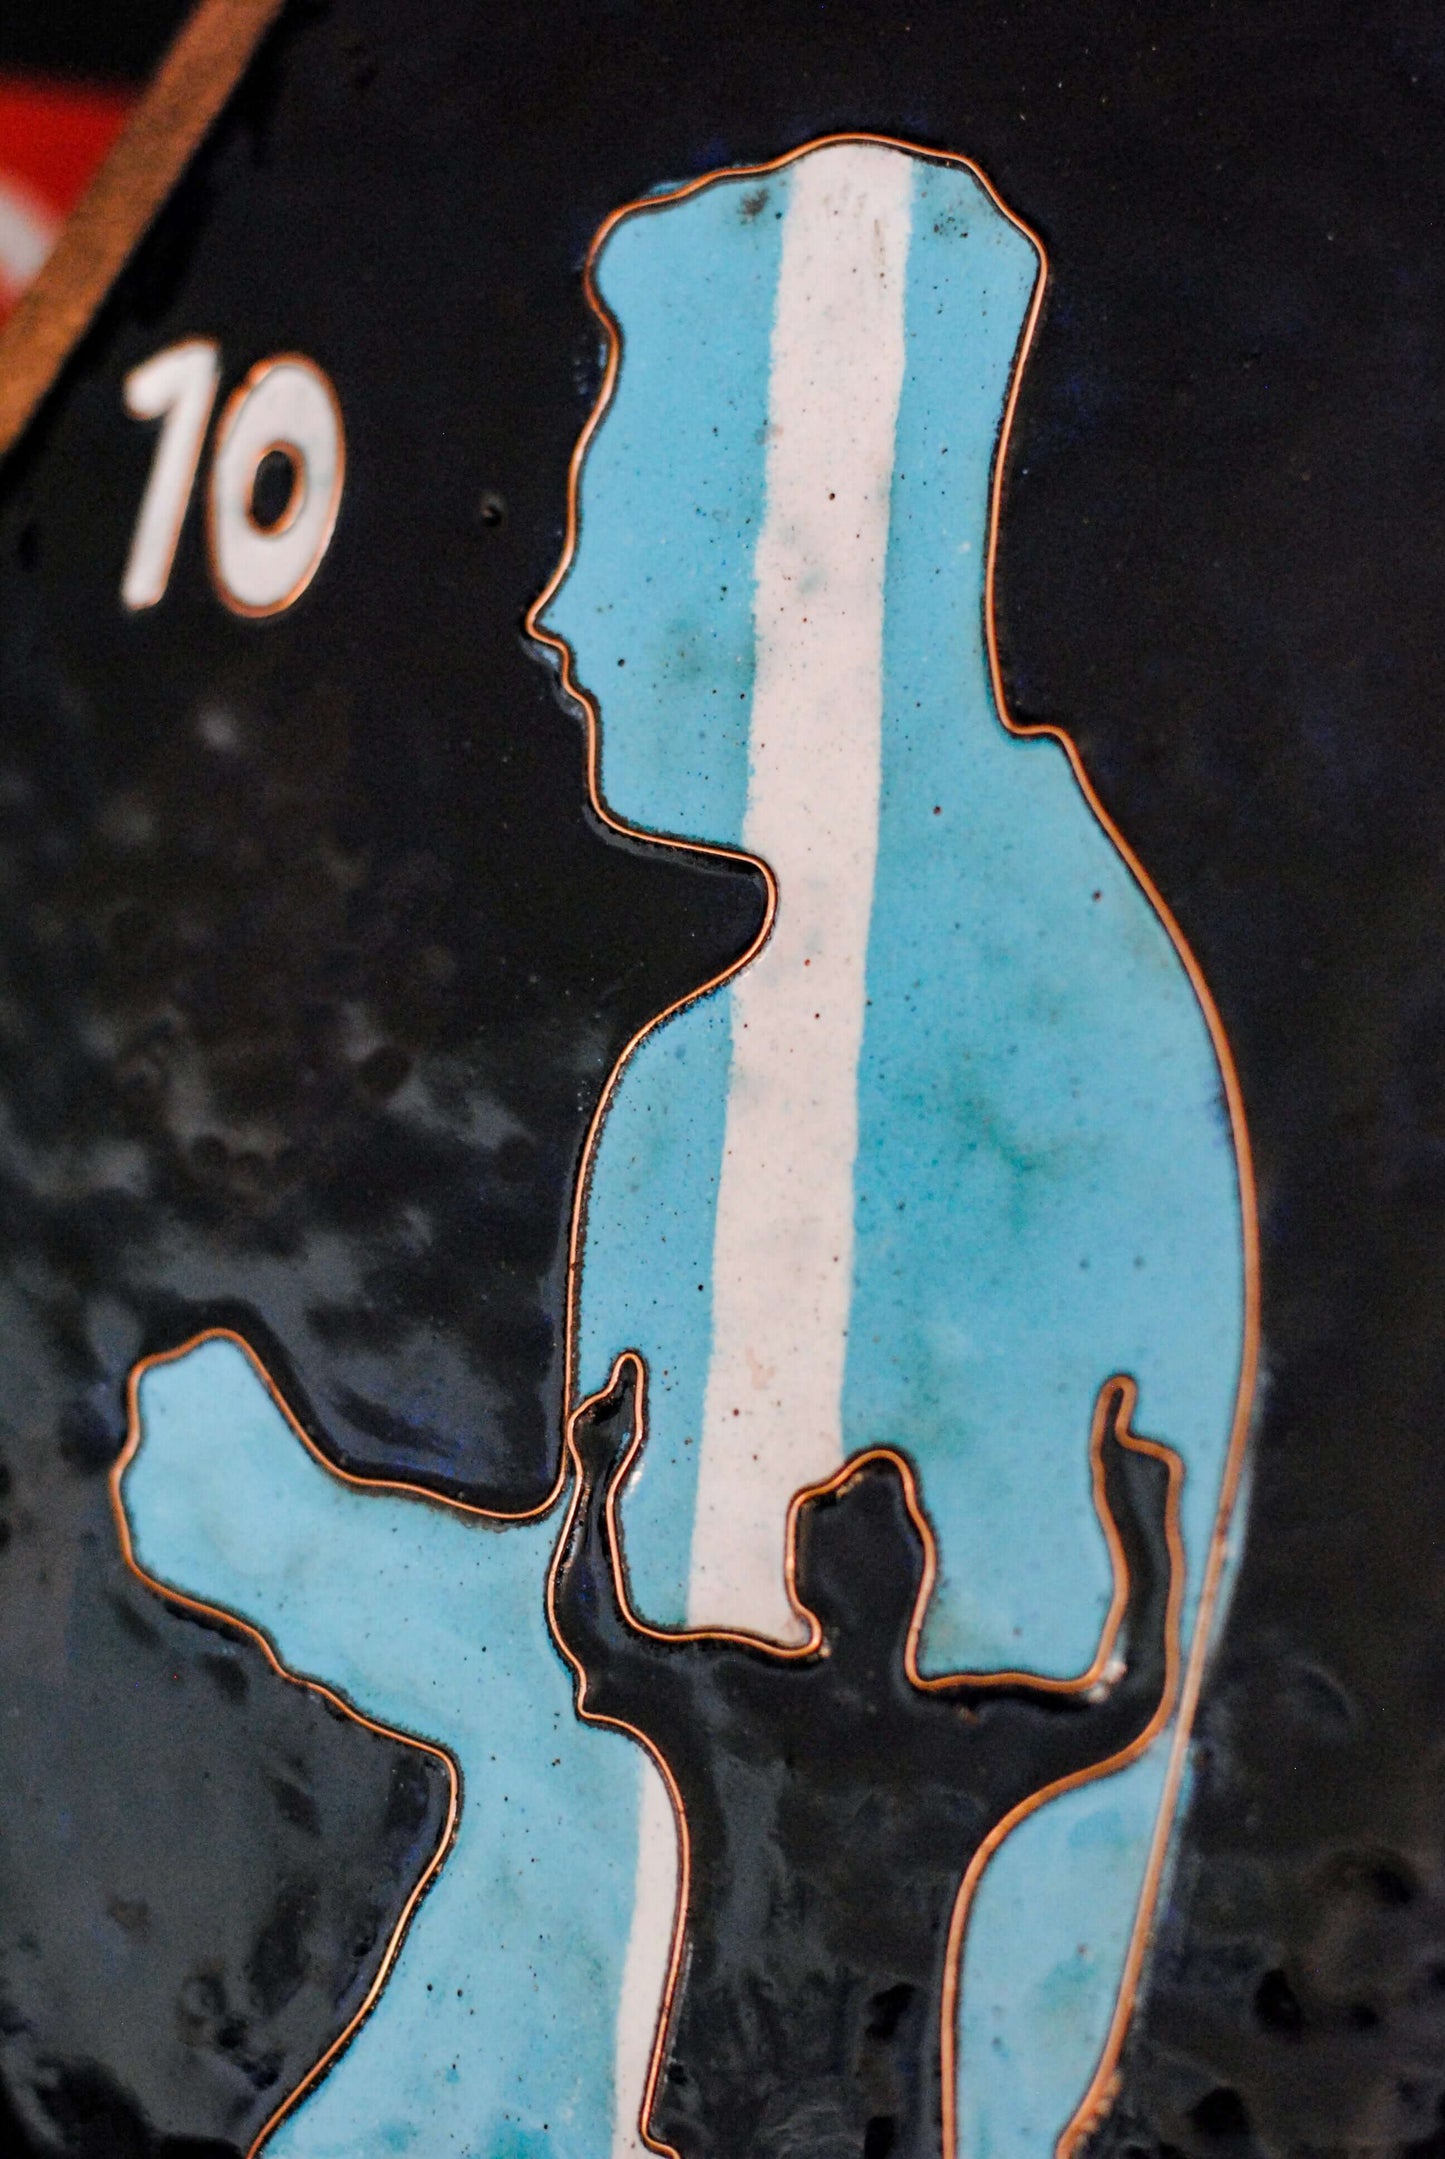 Copper enameled wallplates to celebrate FIFA legacies, Messi. With The Plated Project